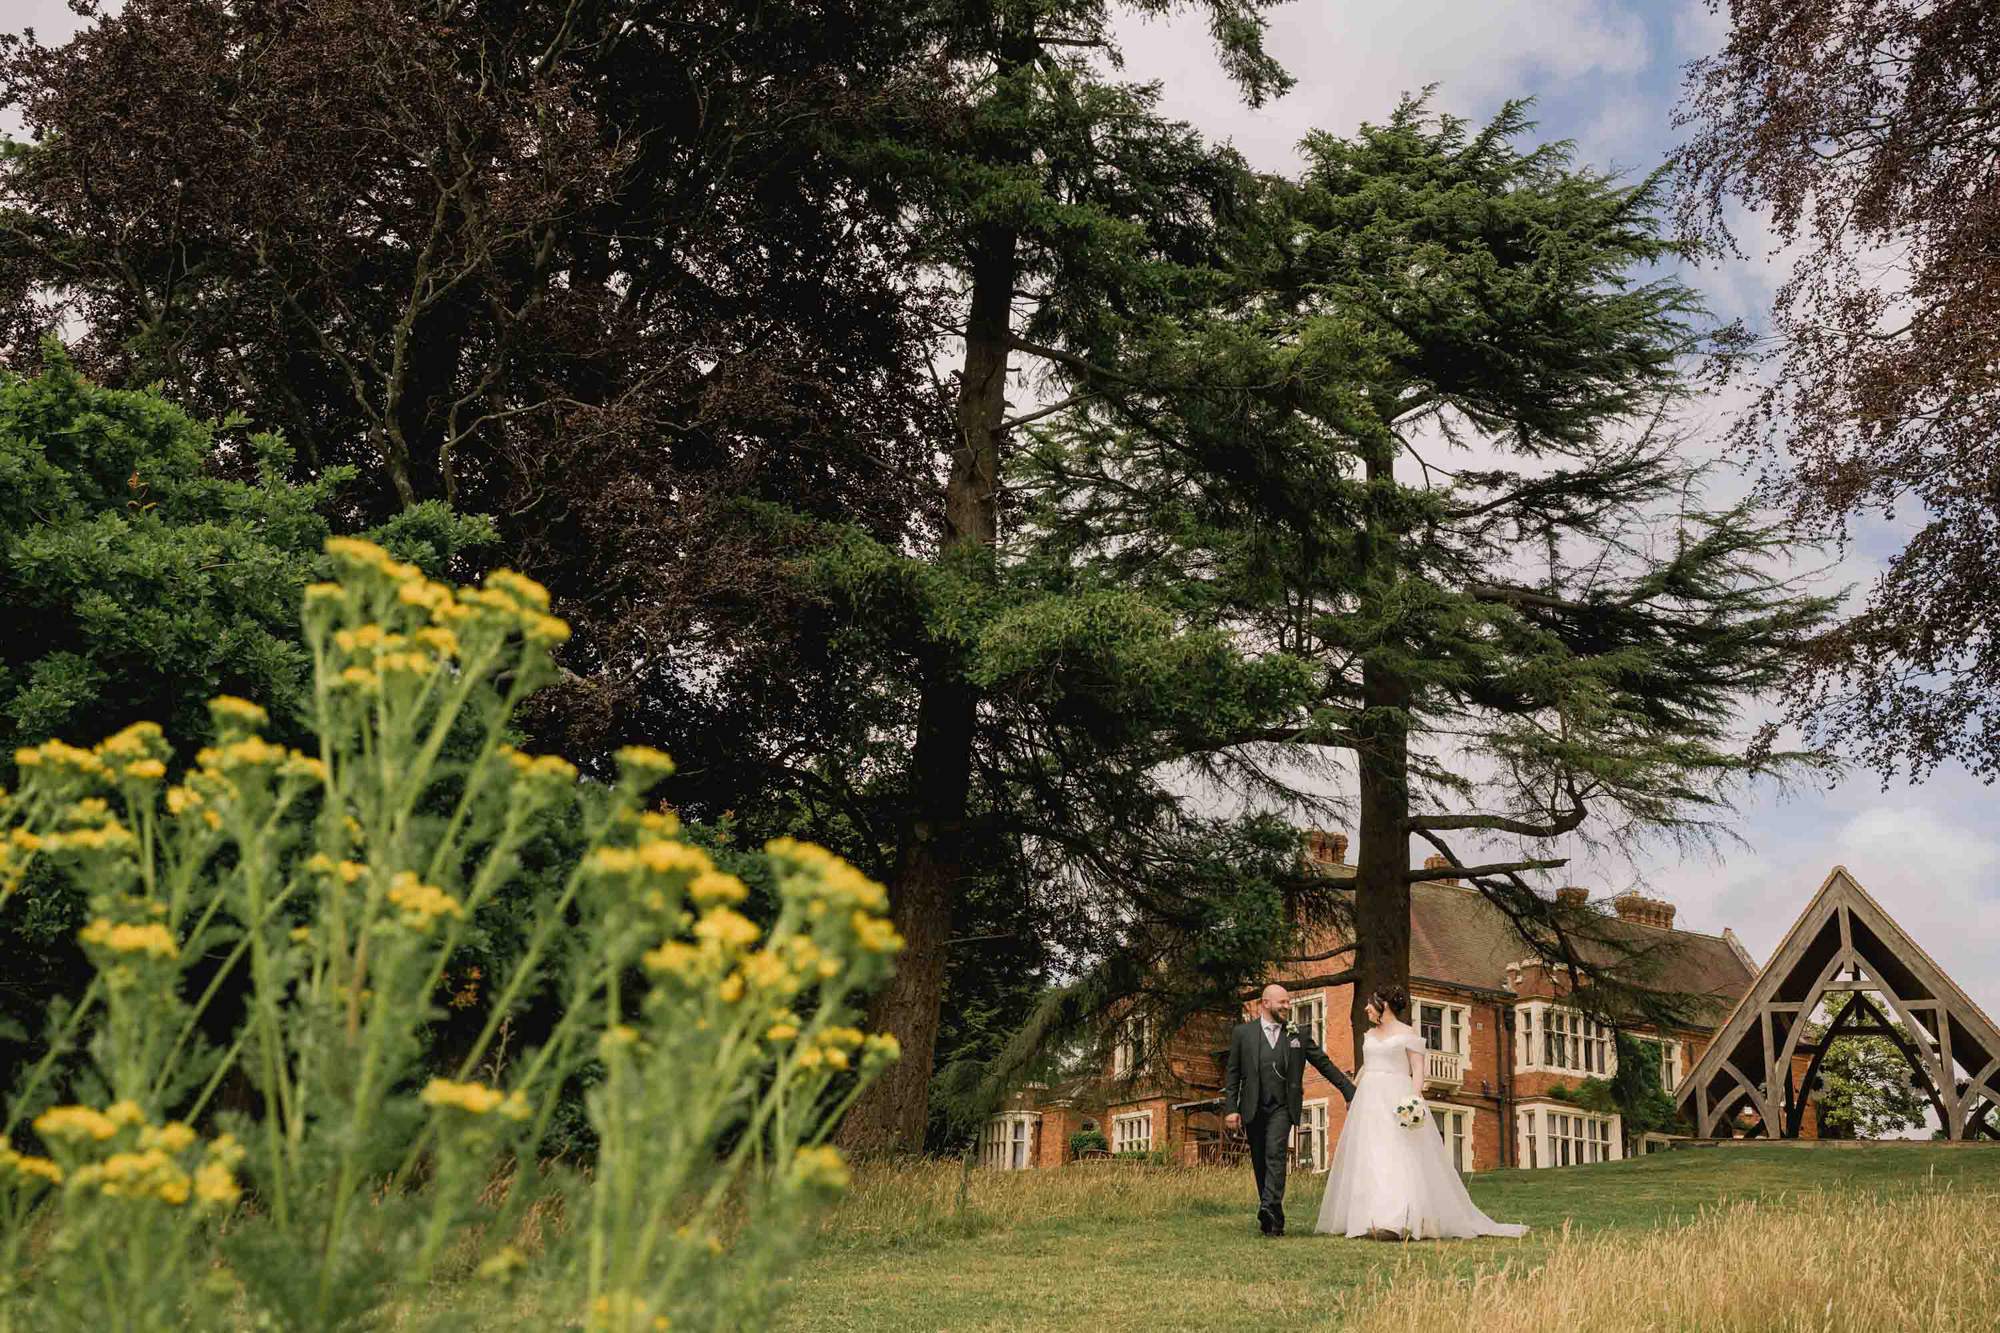 Bride and groom taking a stroll on their wedding day at Highley Manor in Sussex.